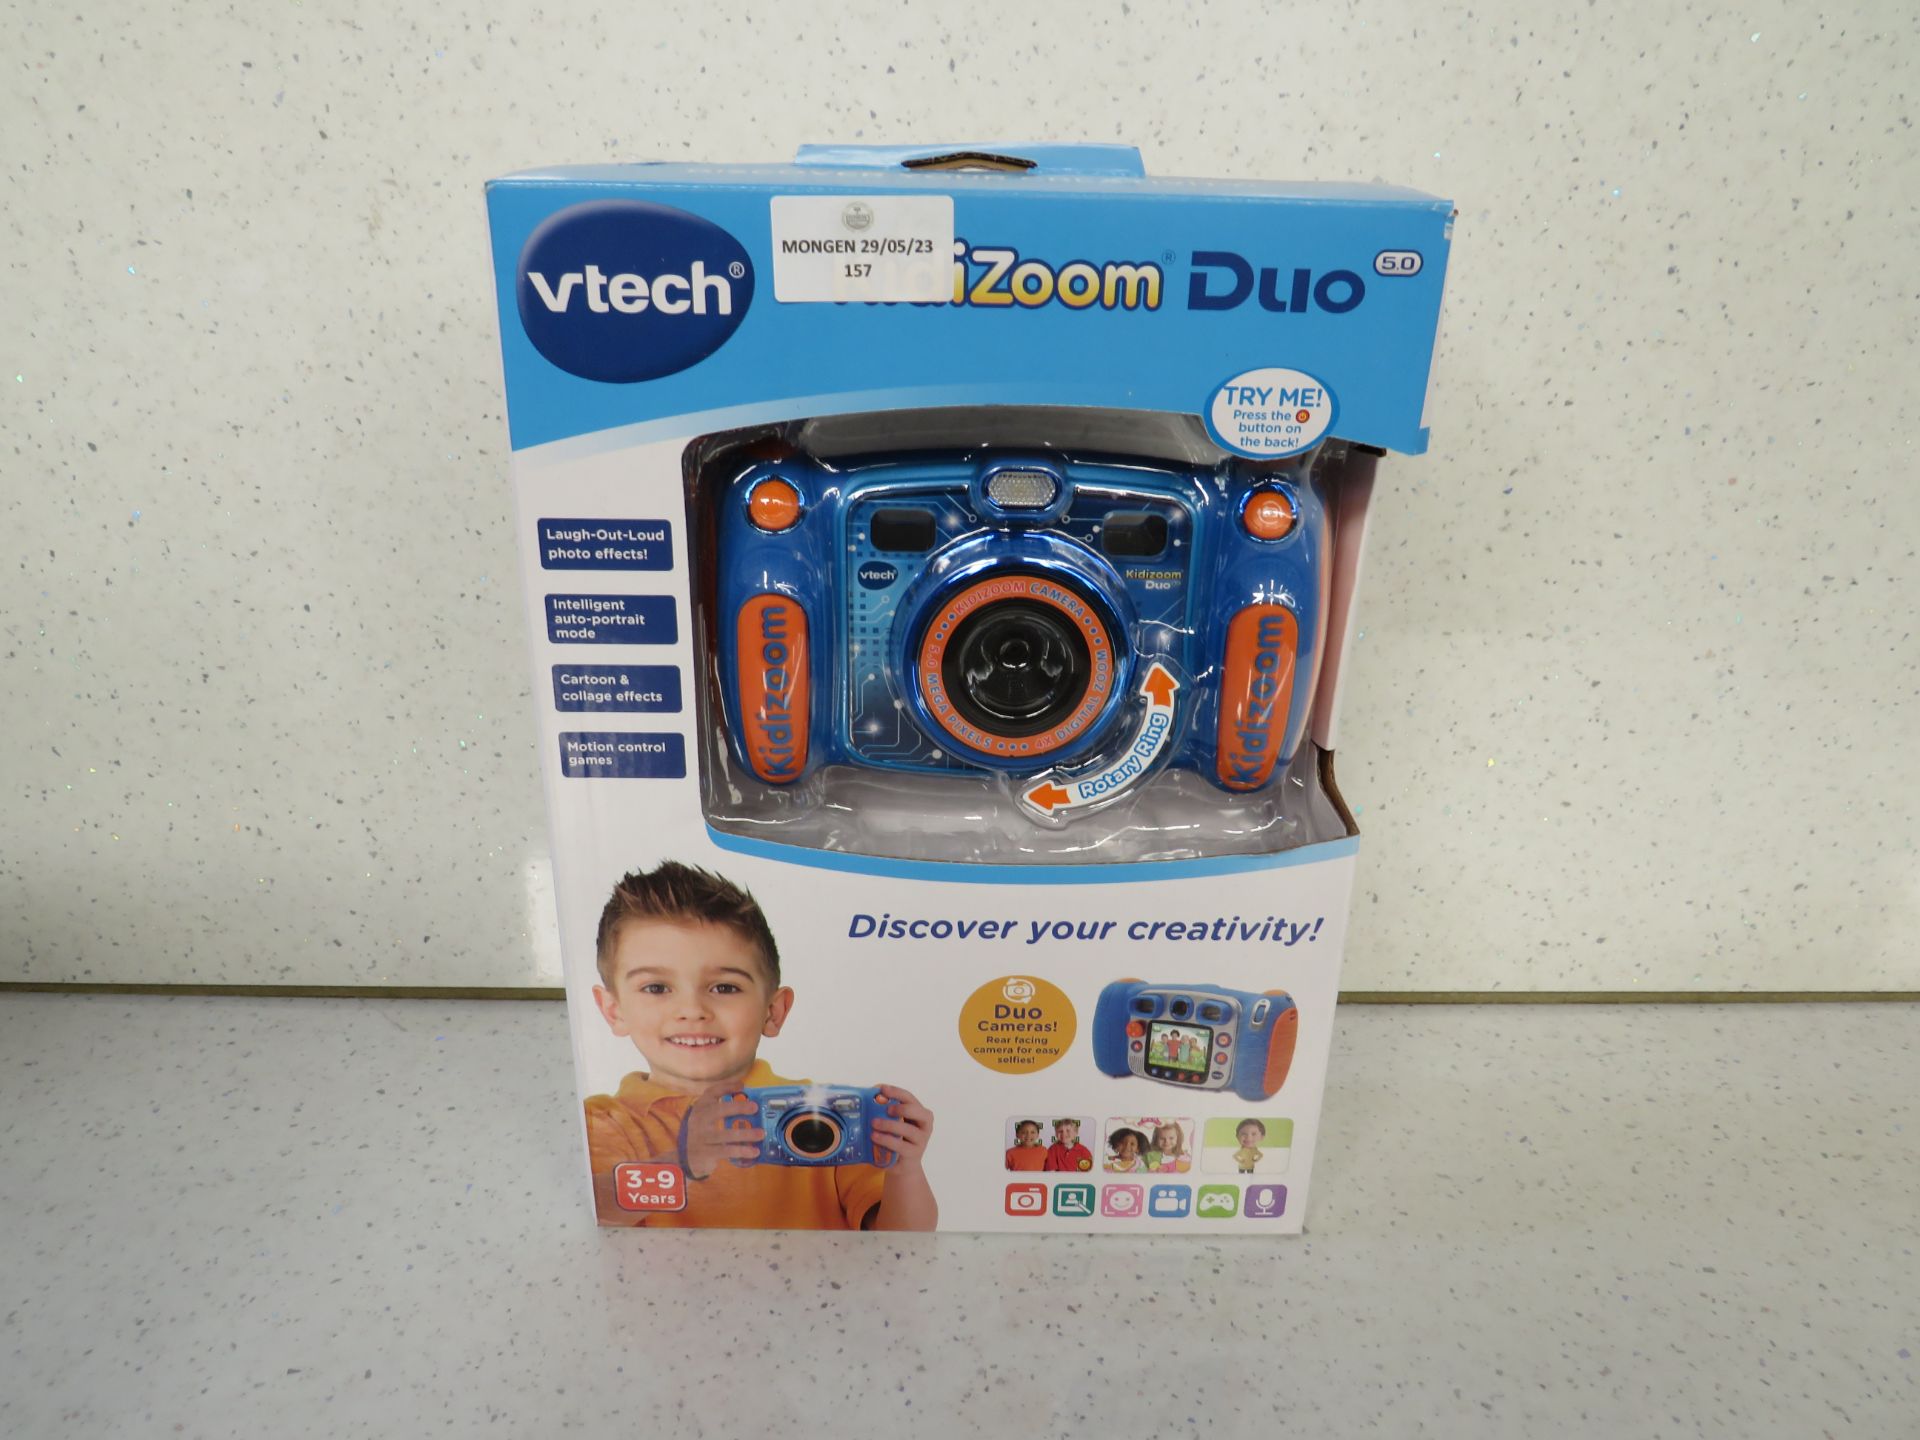 Vtech - Kidizoom Duo 5.0 - Untested & Boxed.